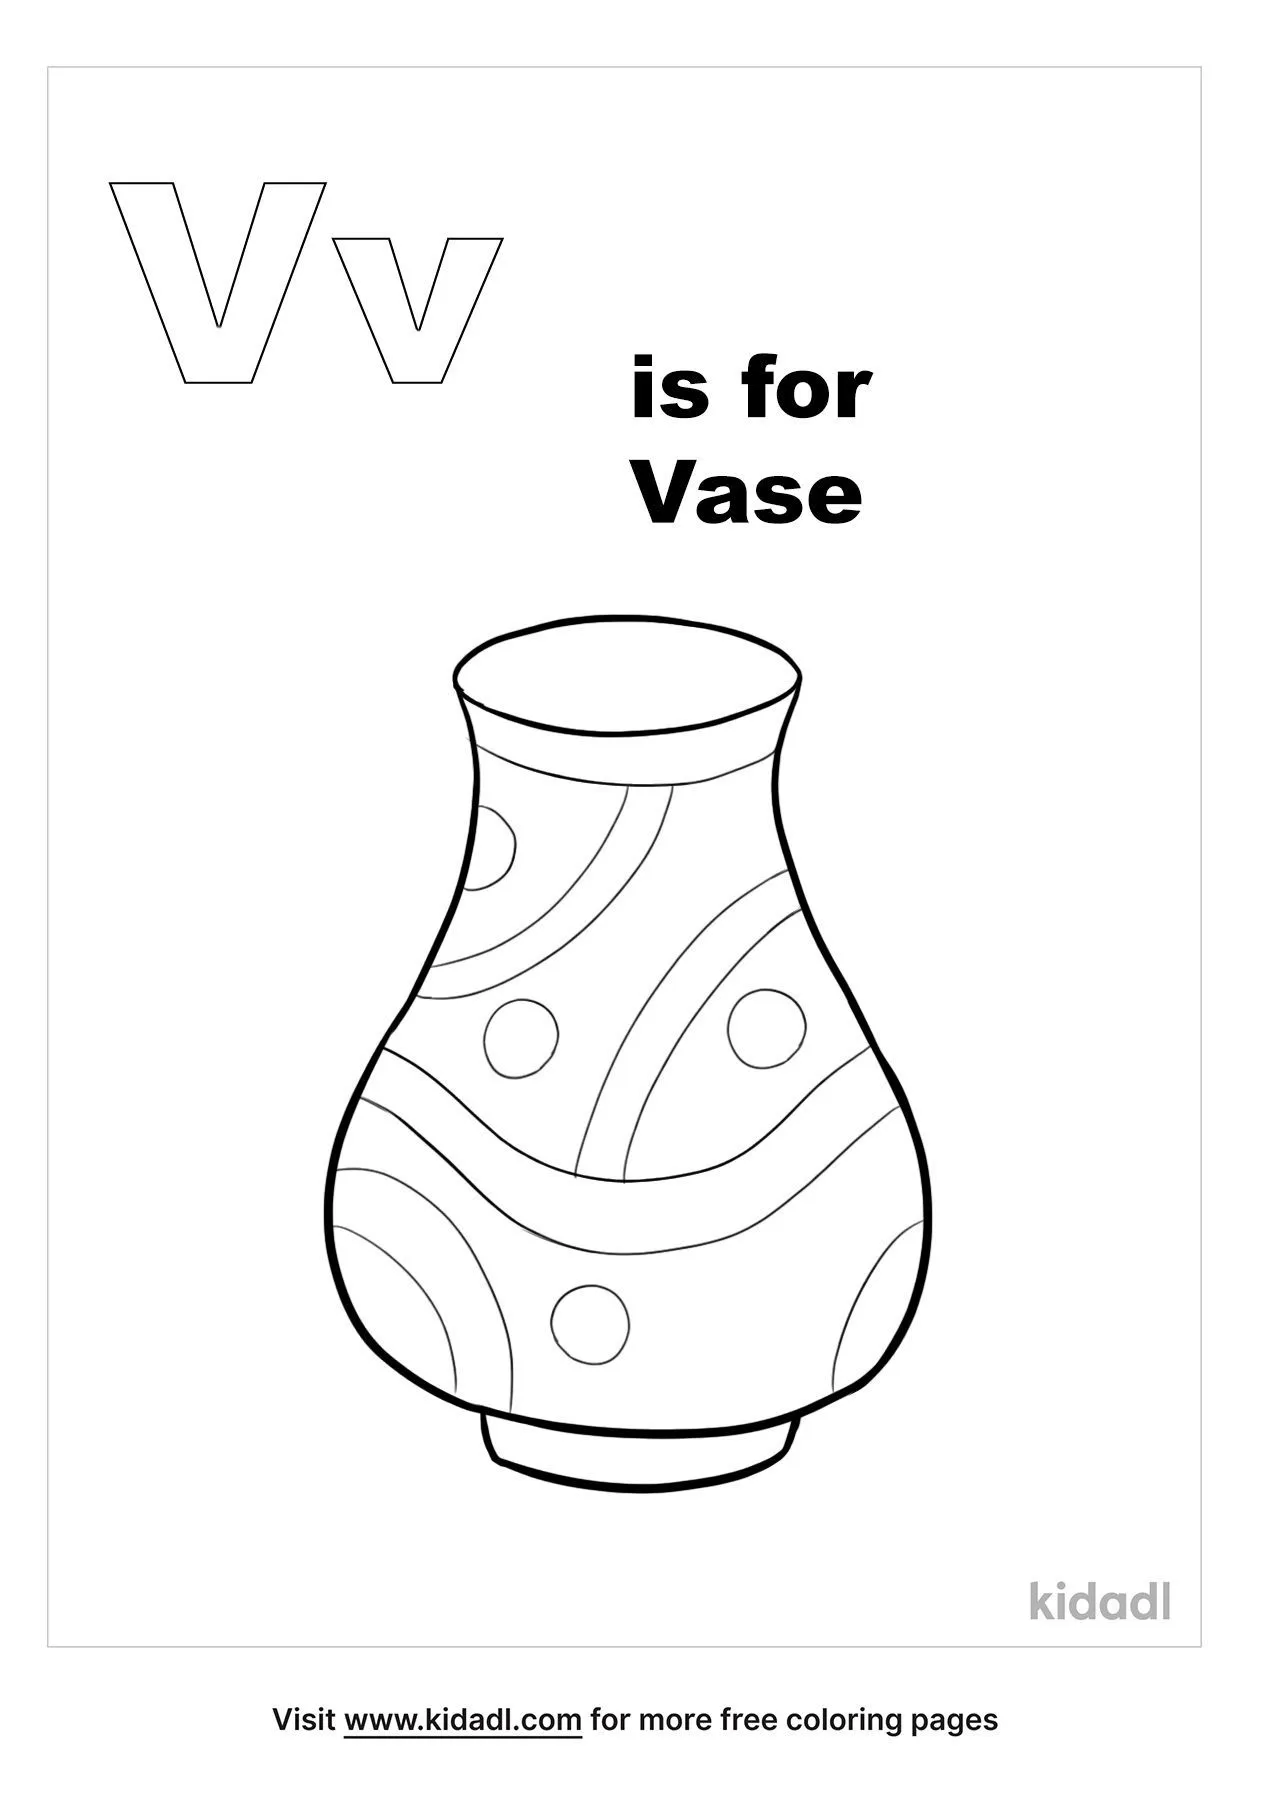 Free v is for vase coloring page coloring page printables